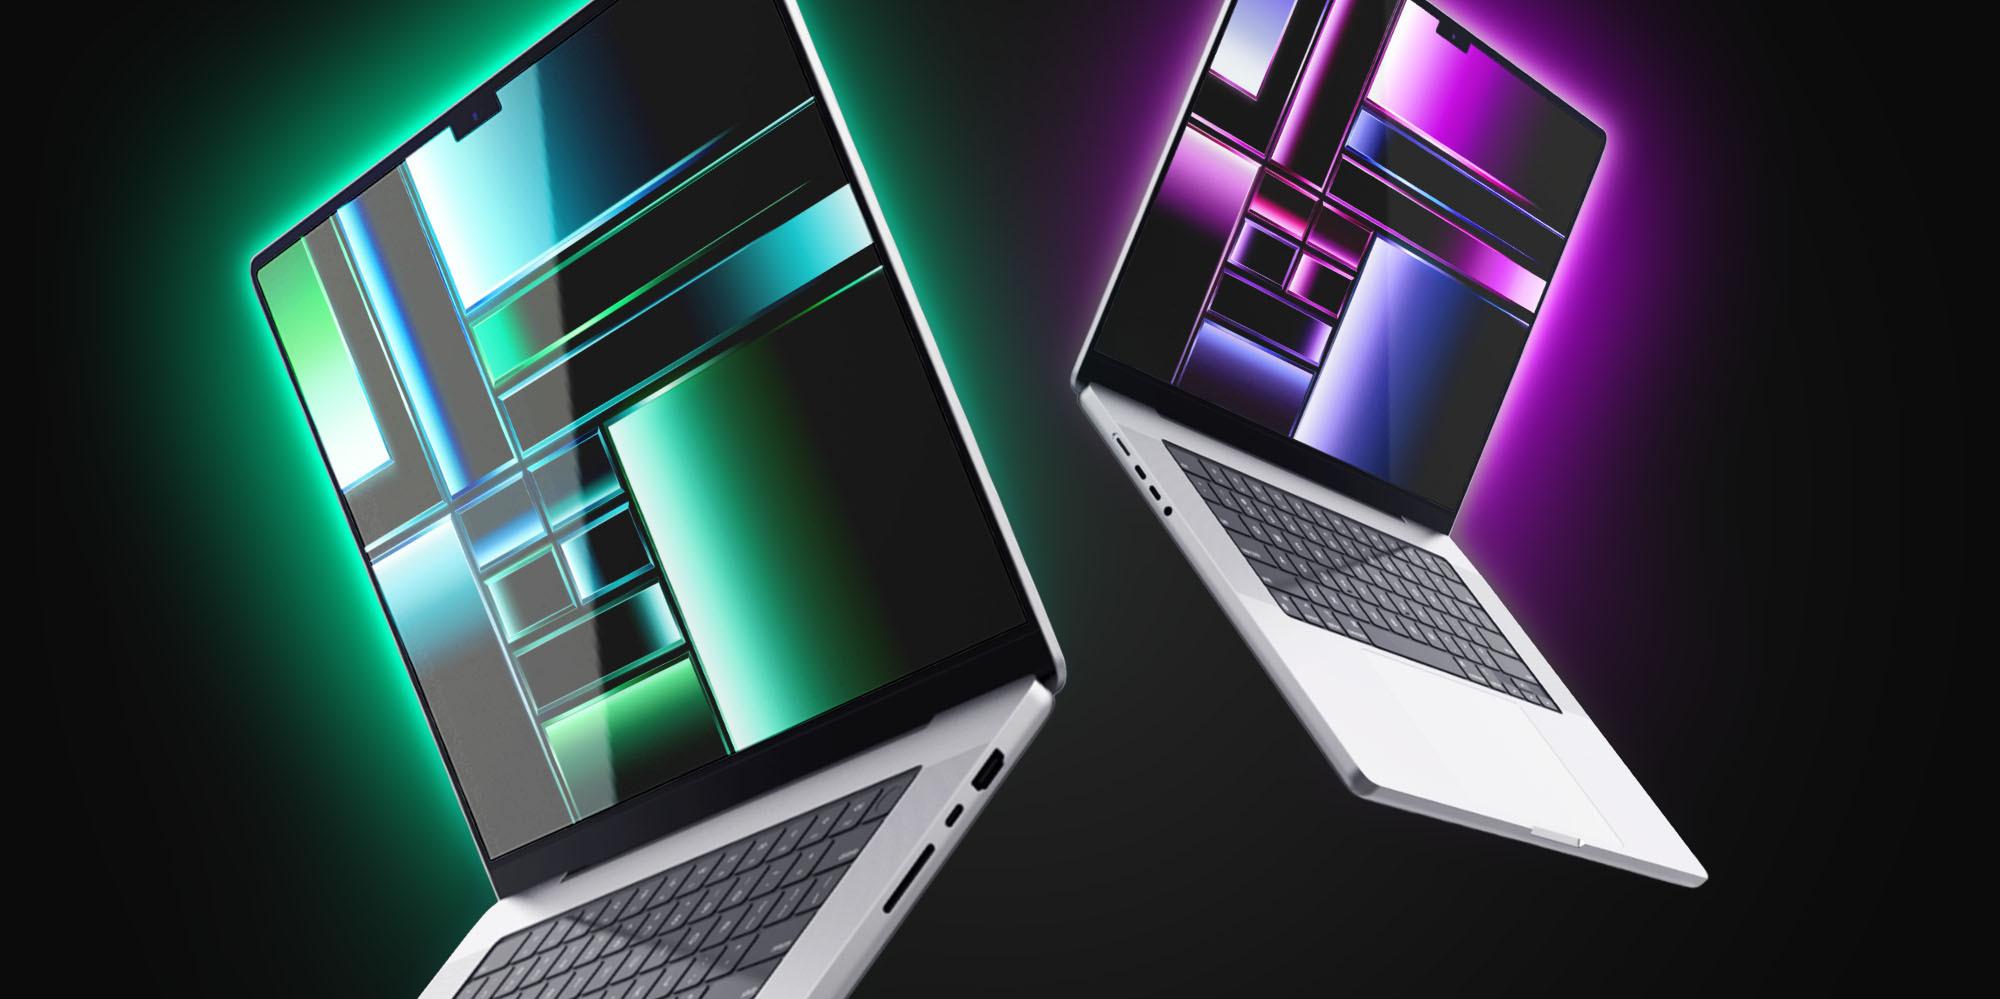 Download the new 2023 MacBook Pro wallpapers right here